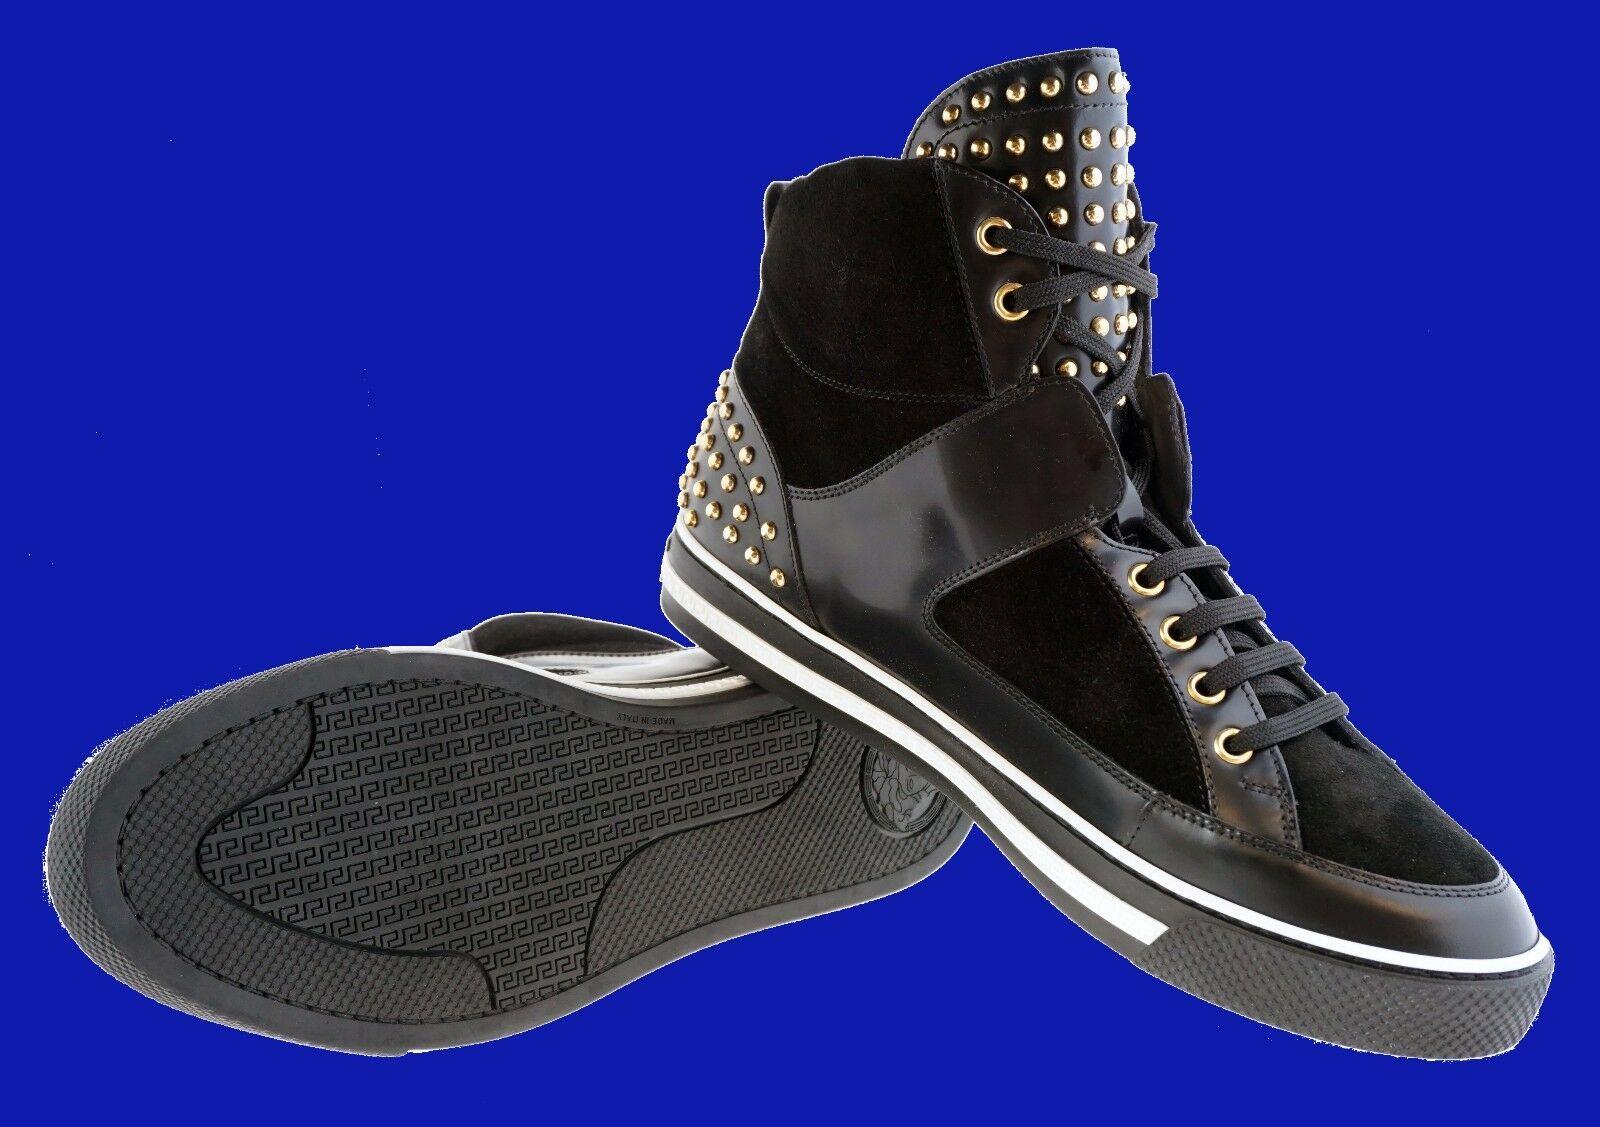 Black NEW VERSACE STUDDED HIGH-TOP Sneakers 42.5 - 9.5